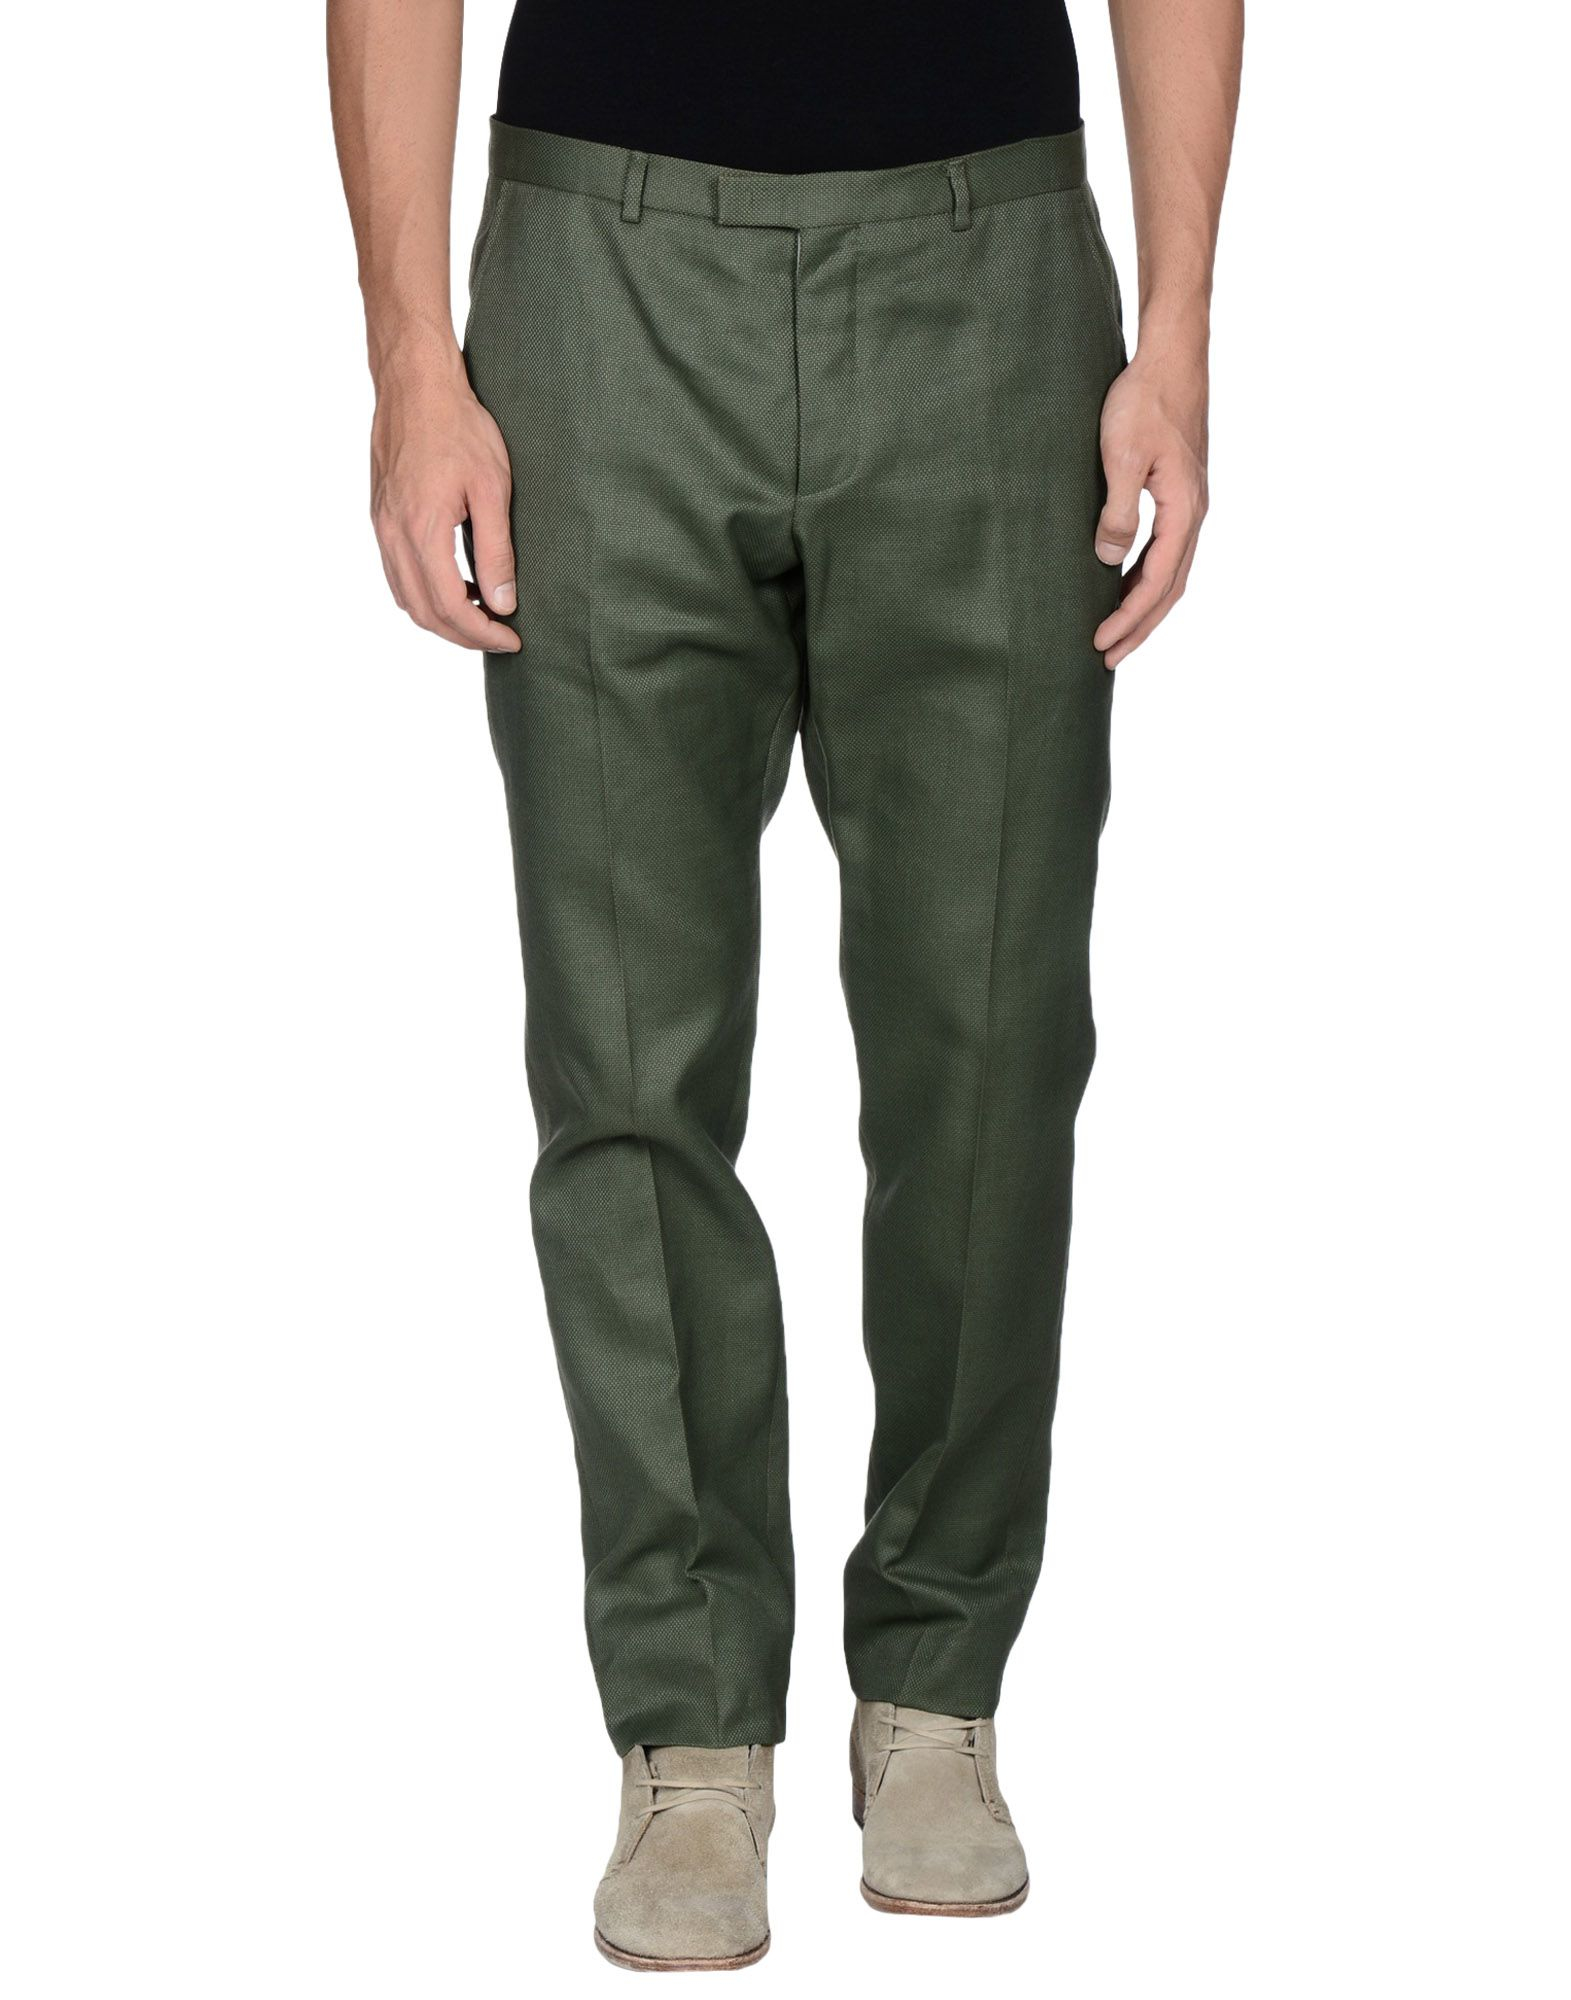 Lyst - Gucci Casual Pants in Green for Men